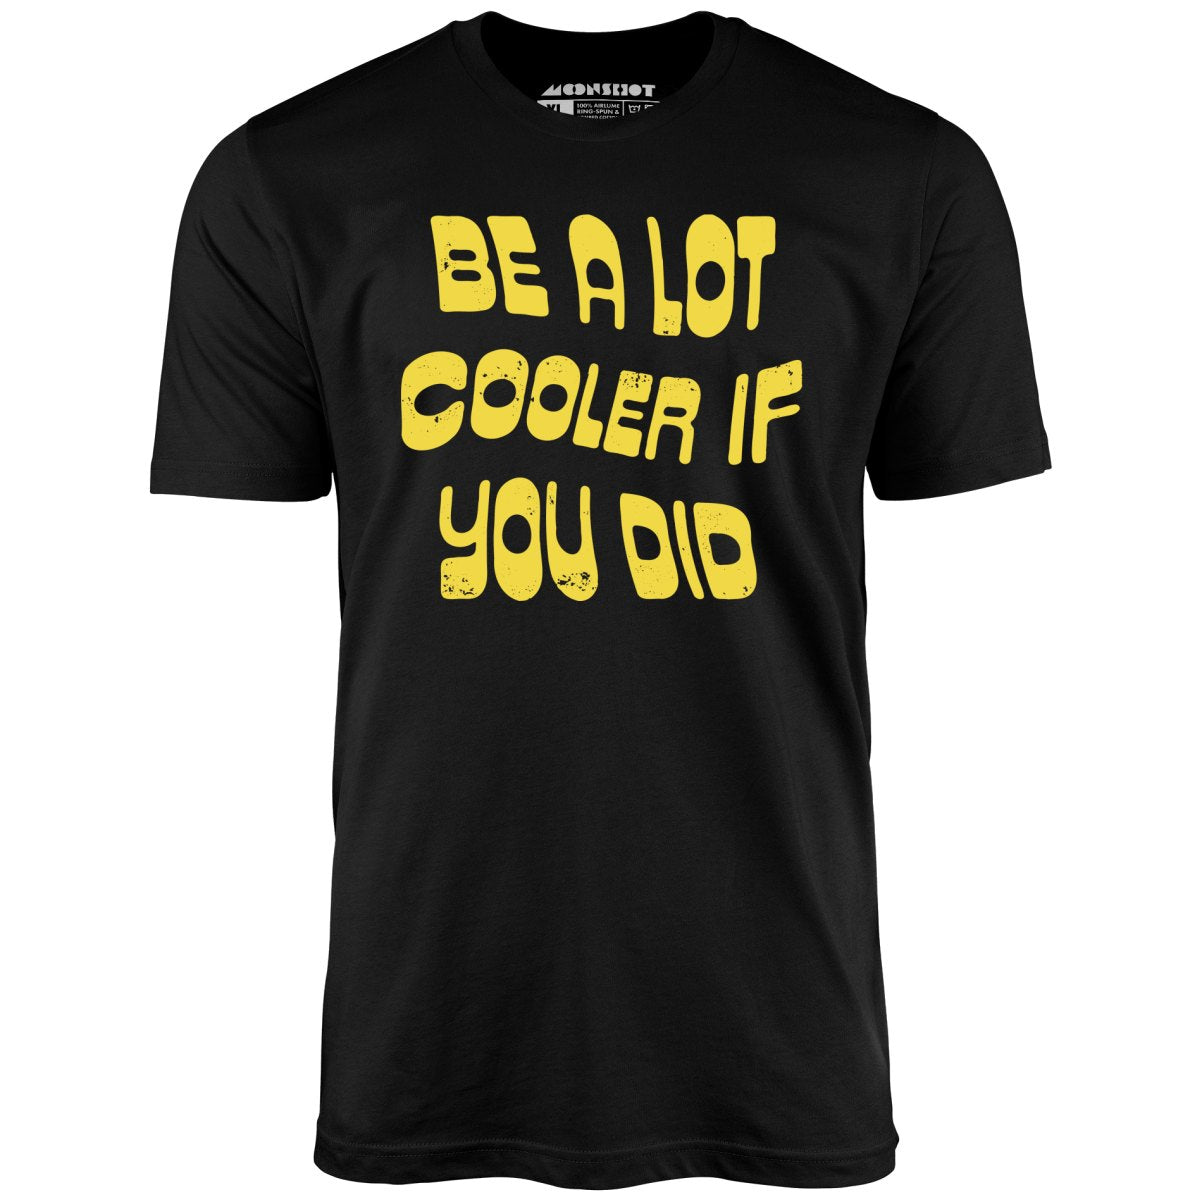 Be a Lot Cooler if You Did - Unisex T-Shirt